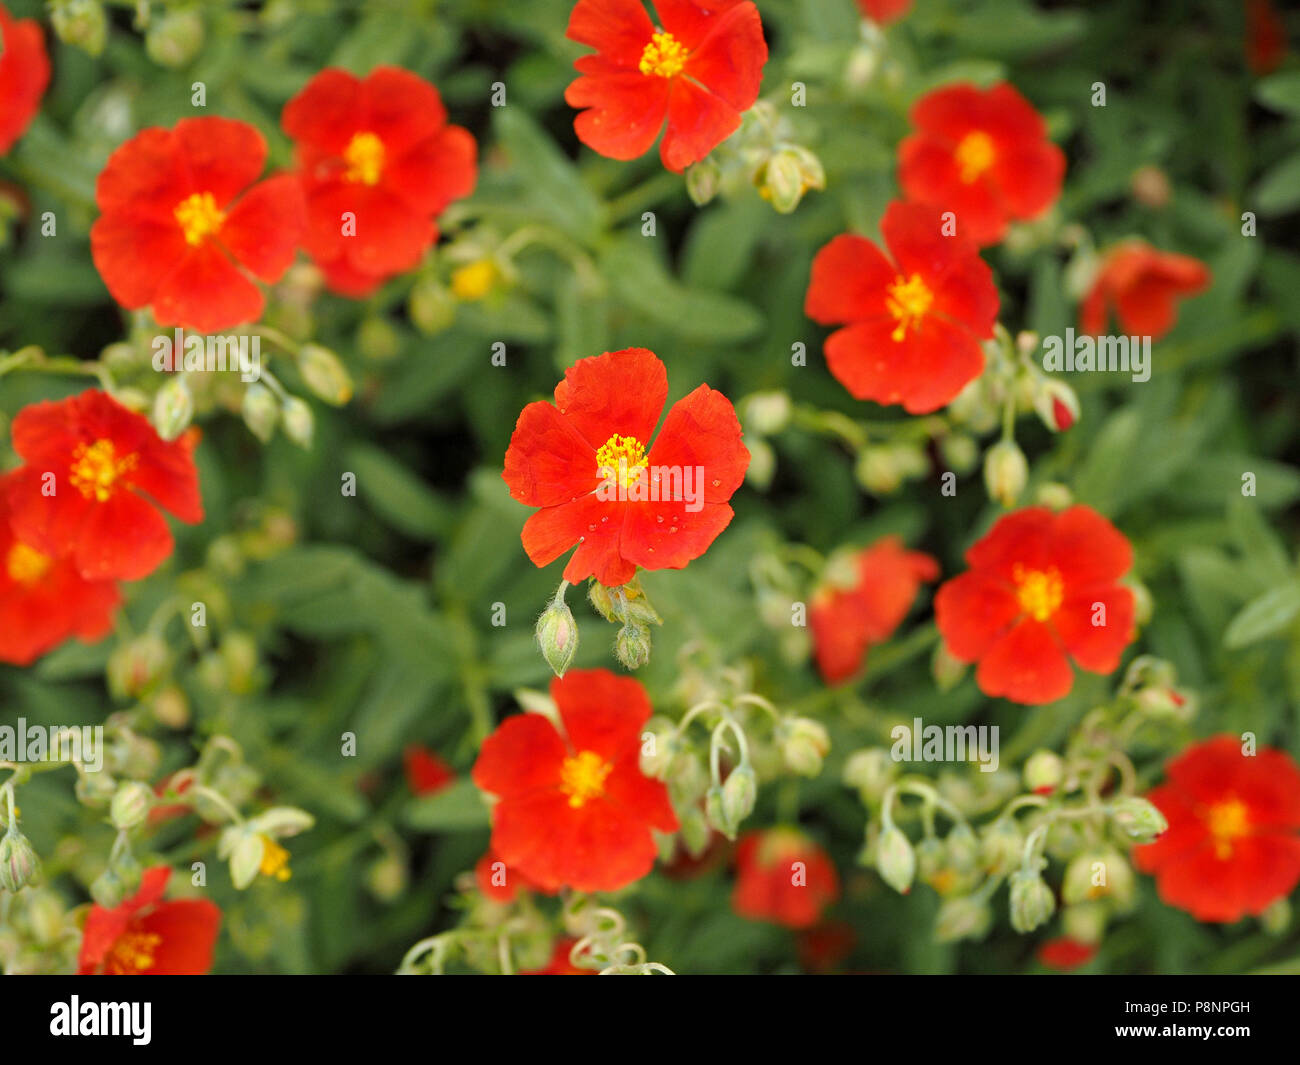 bright red garden flowers with yellow centres make striking pattern in Cumbria,England ,UK Stock Photo